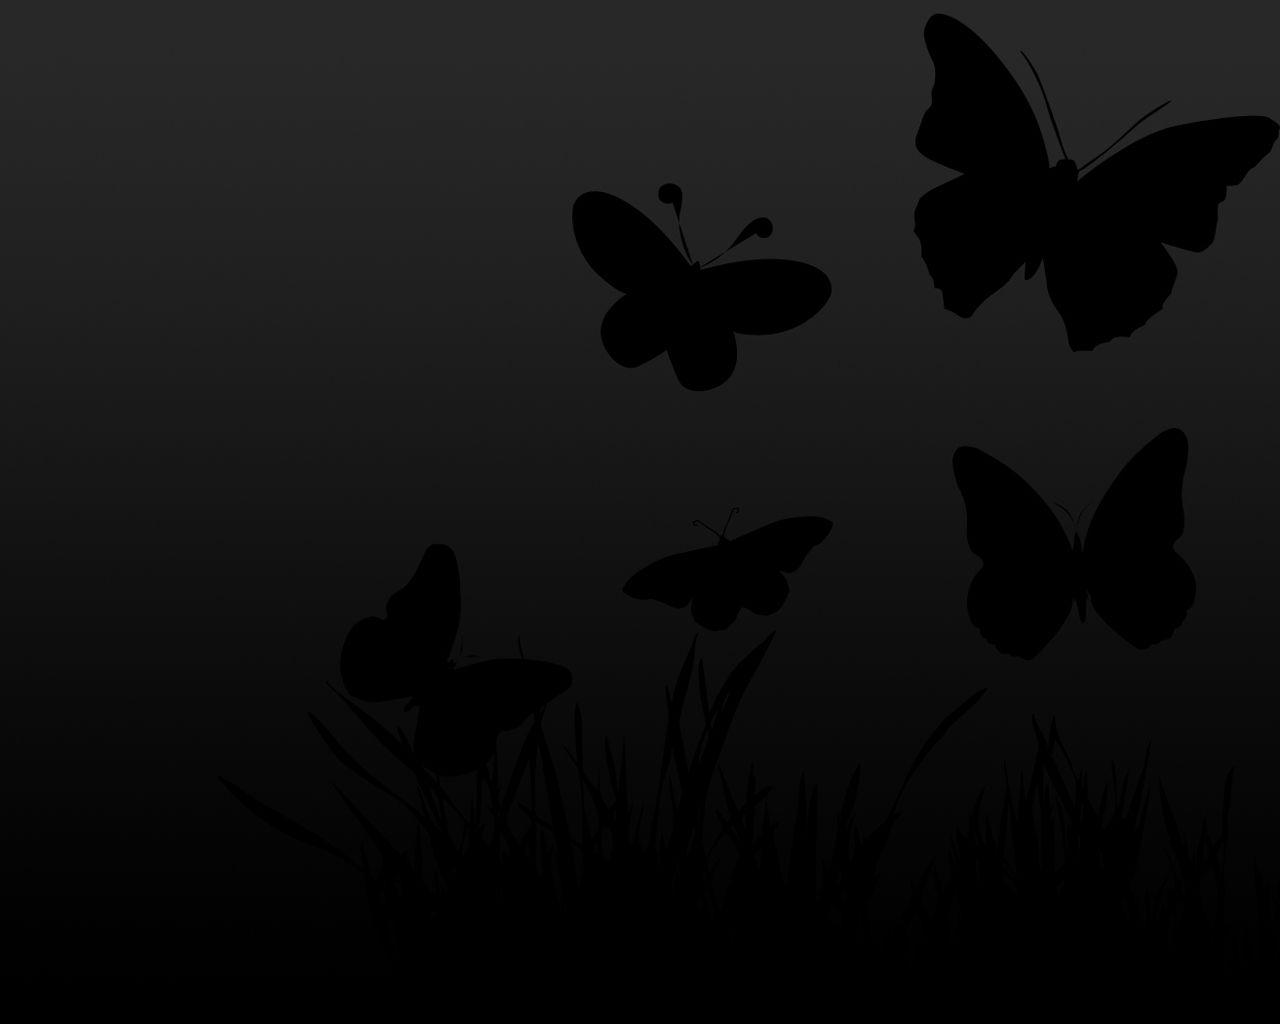 Black Butterfly Hd Wallpapers Top Free Black Butterfly Hd Backgrounds Wallpaperaccess